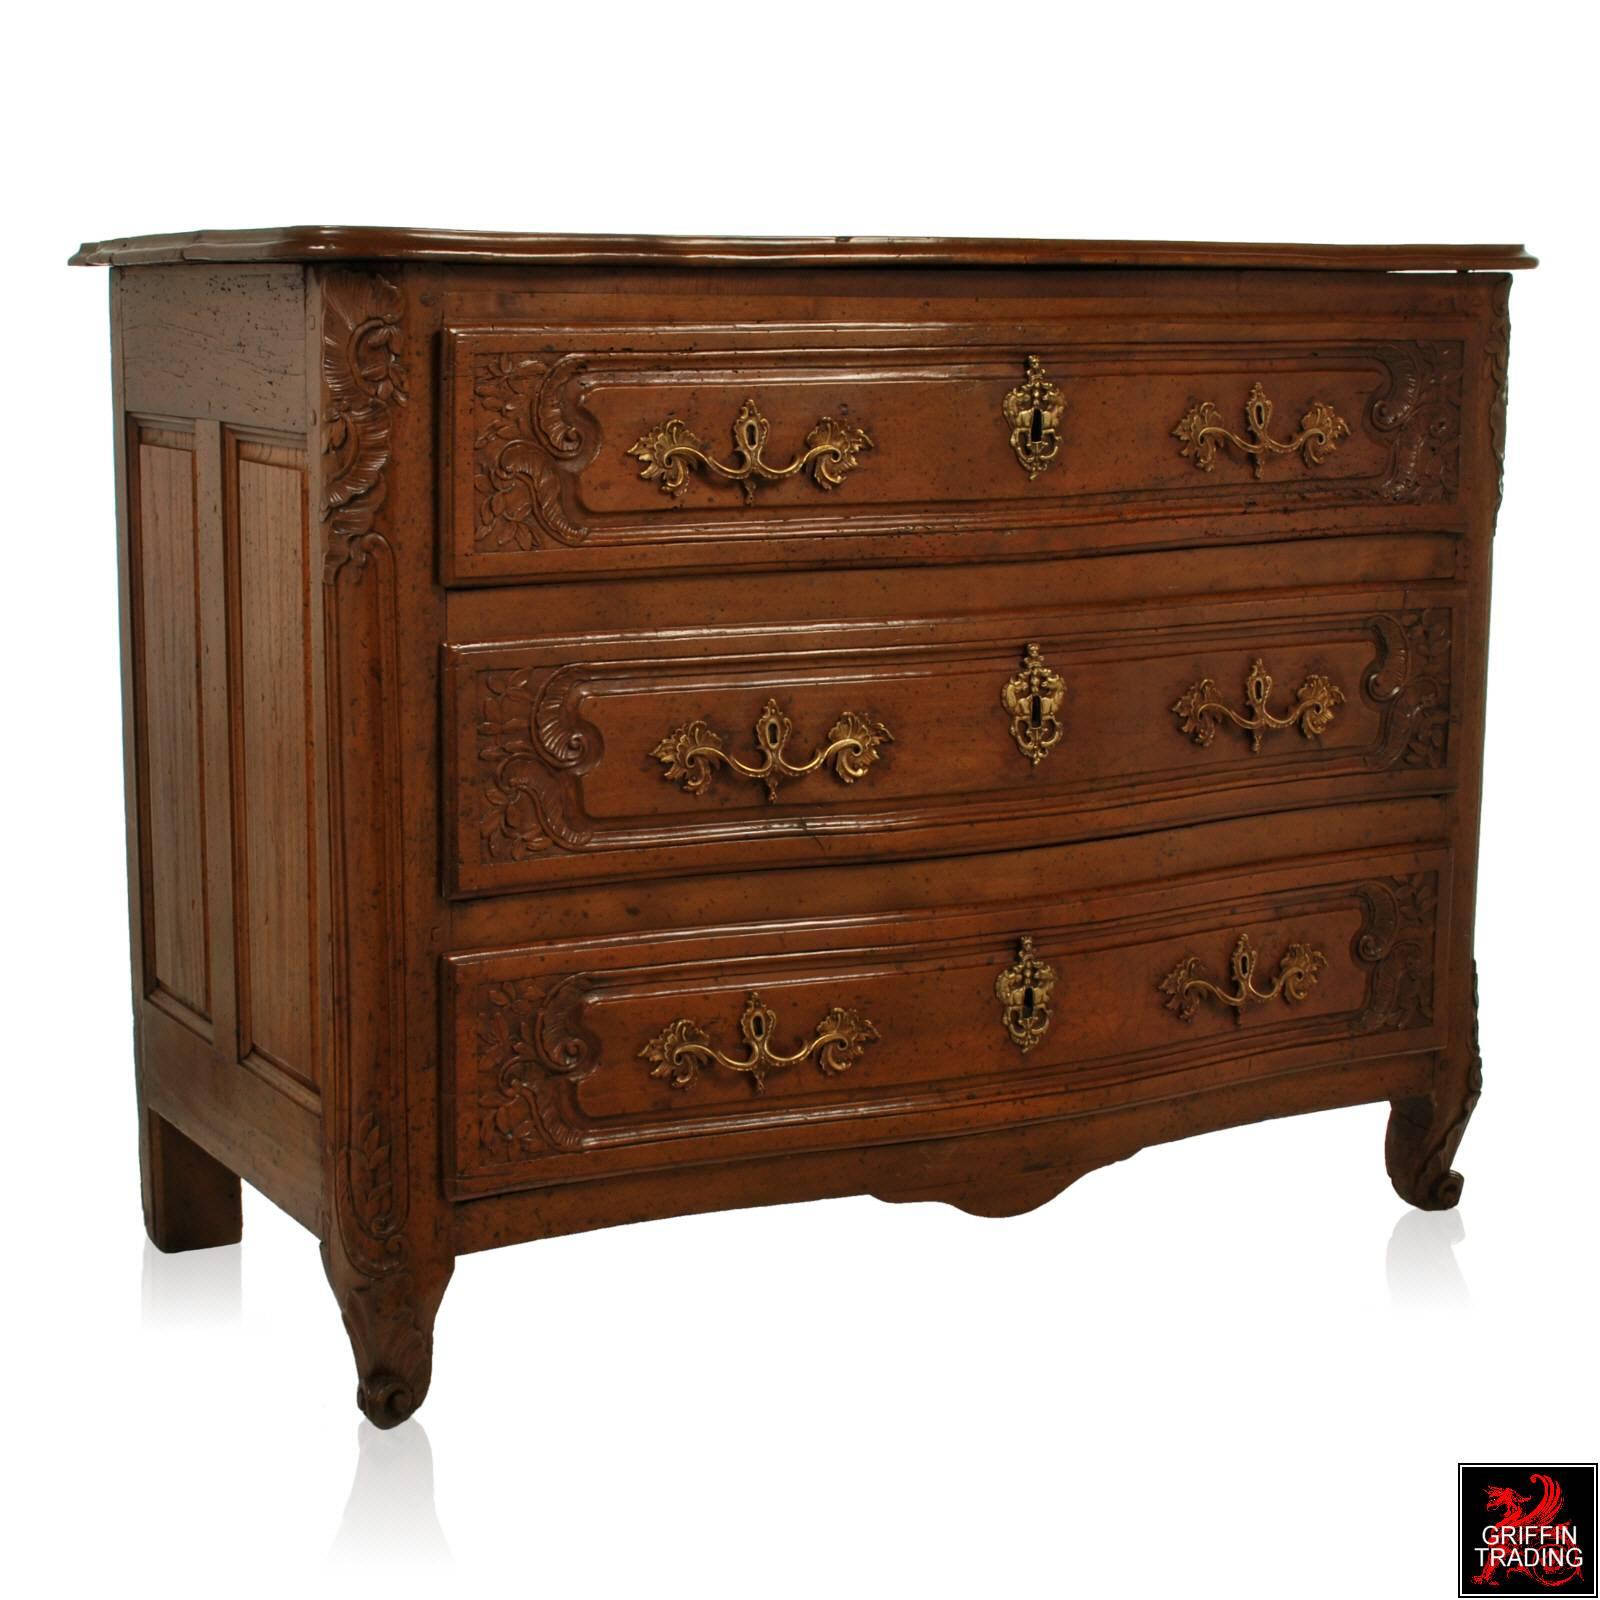 This handsome 18th century French Louis XV period three-drawer commode is taller and wider than most. The marvelous scale, serpentine shaped front with elaborate carving and rounded corners rest atop scroll feet. Made of solid walnut, this chest of